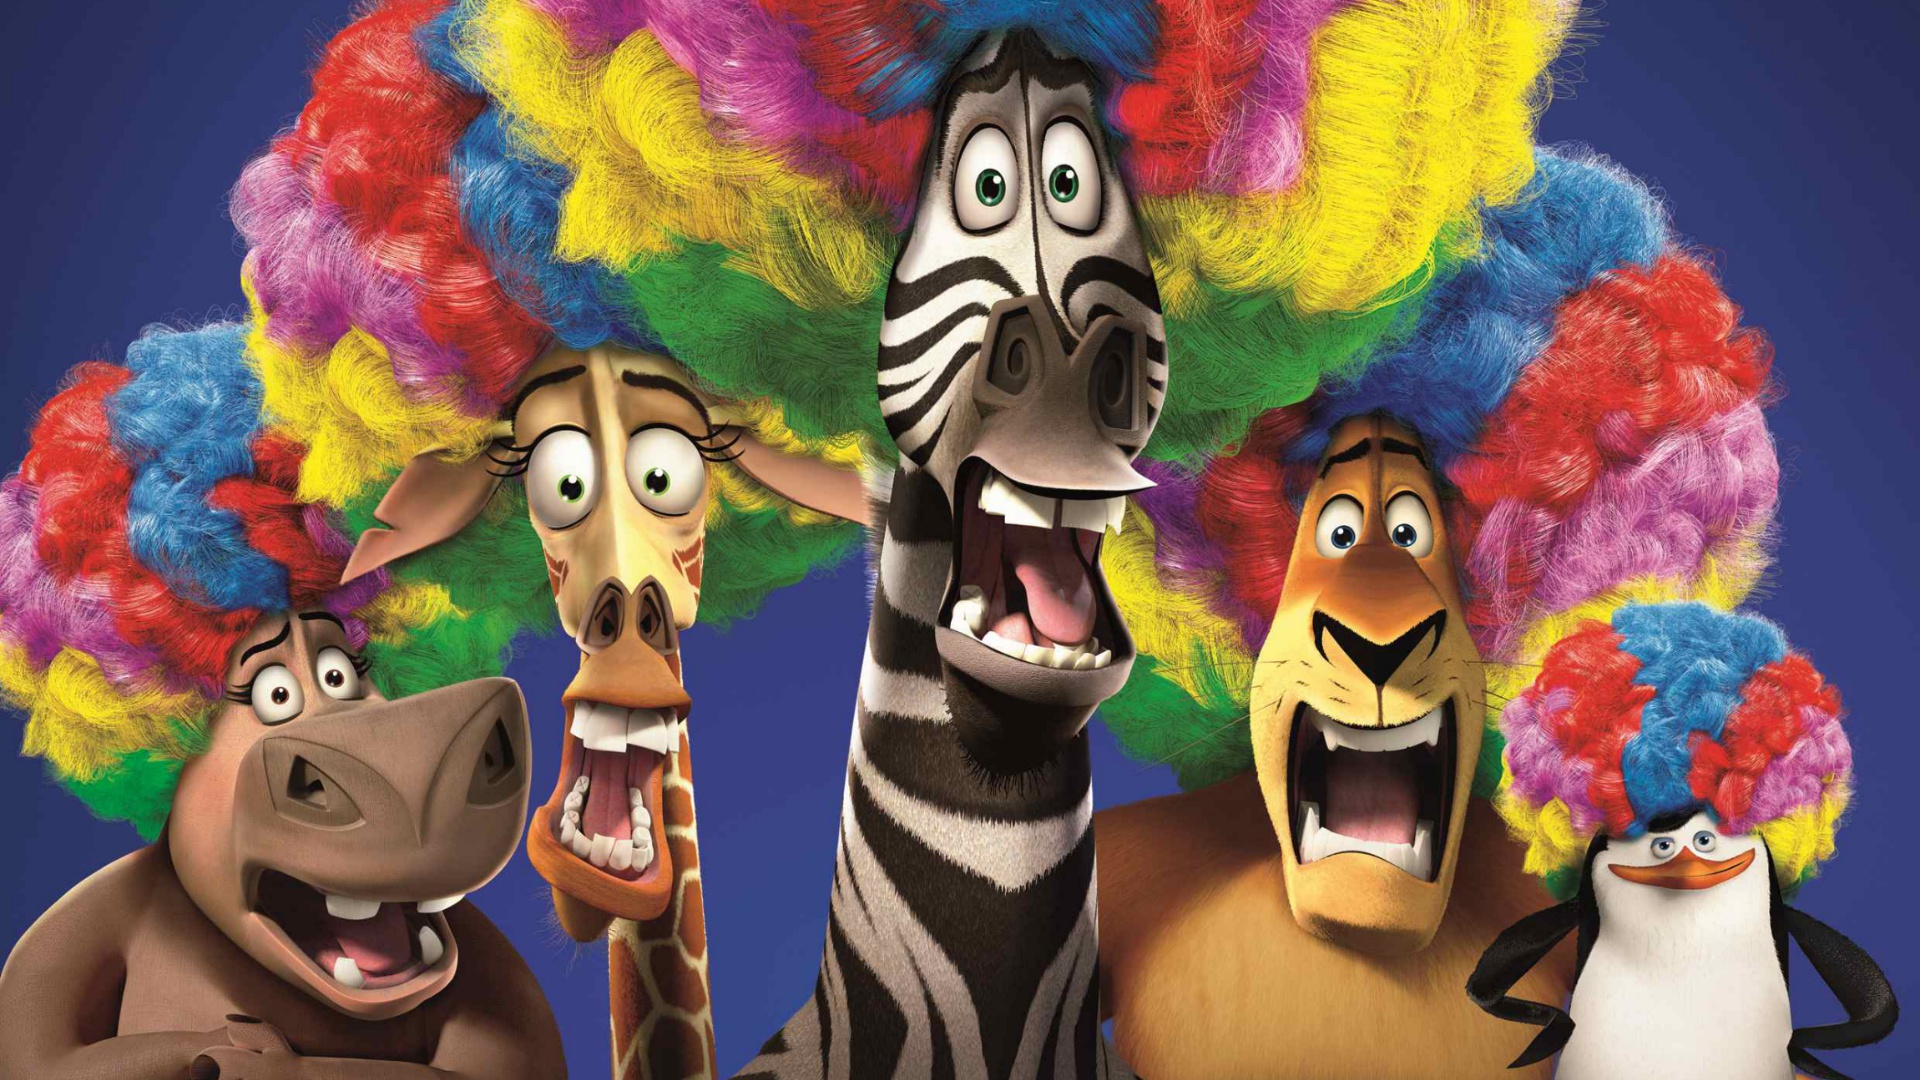 Desktop Wallpaper Madagascar 3: Europe's Most Wanted, Animation, HD Image, Picture, Background, 4u44dv